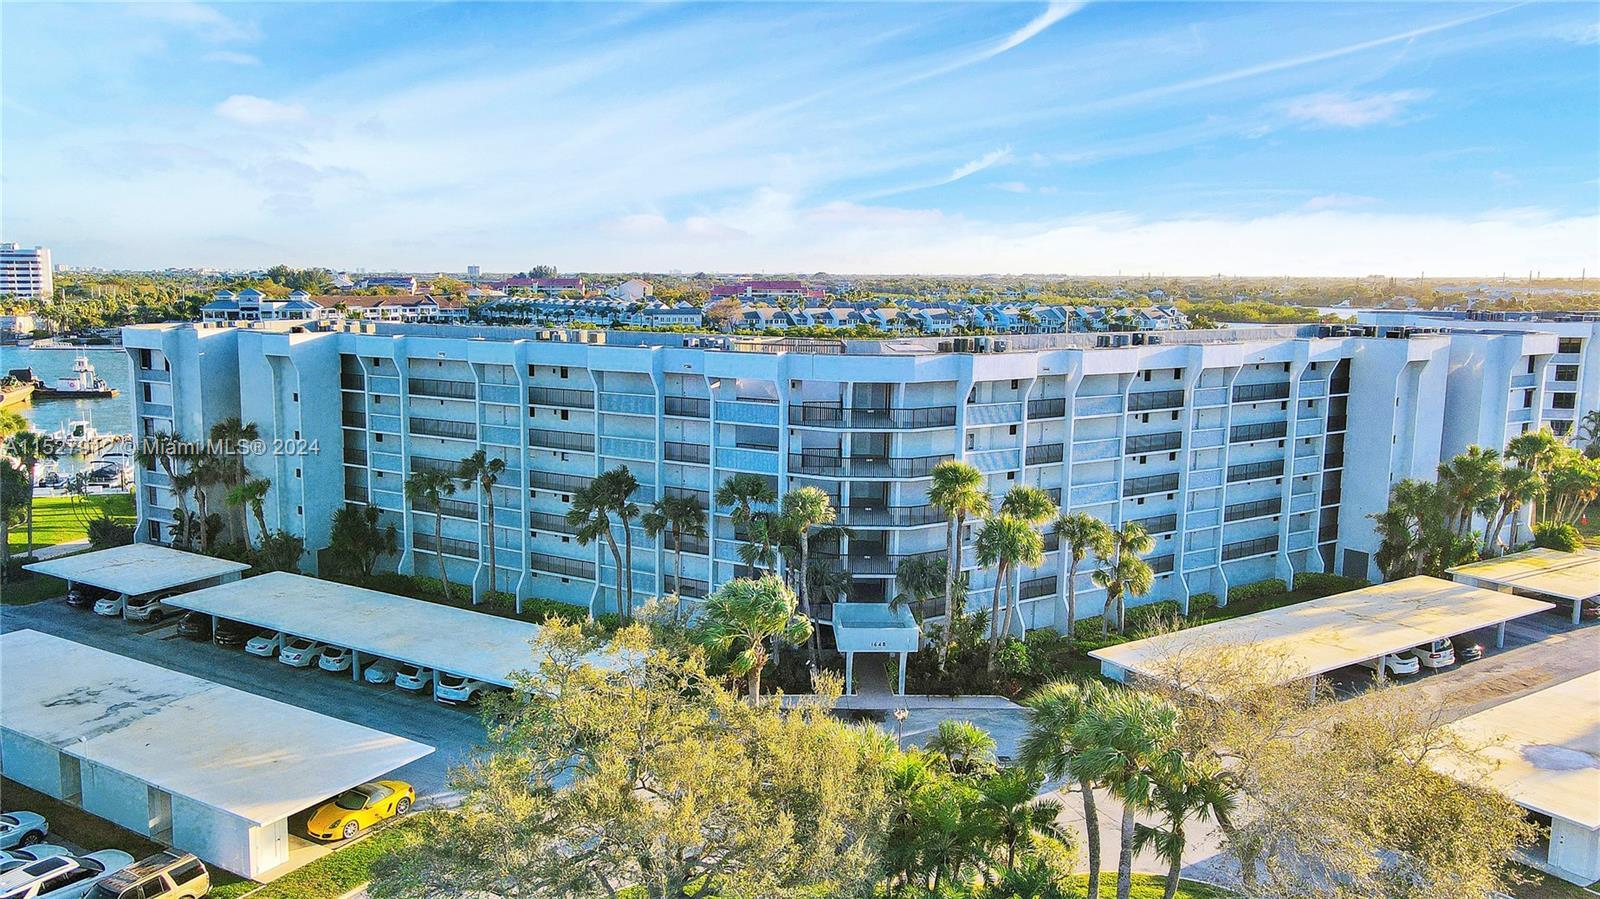 This wonderful 2 Bedroom 2 Bath Unit is on the 5th floor offering amazing Intracoastal Views to the 